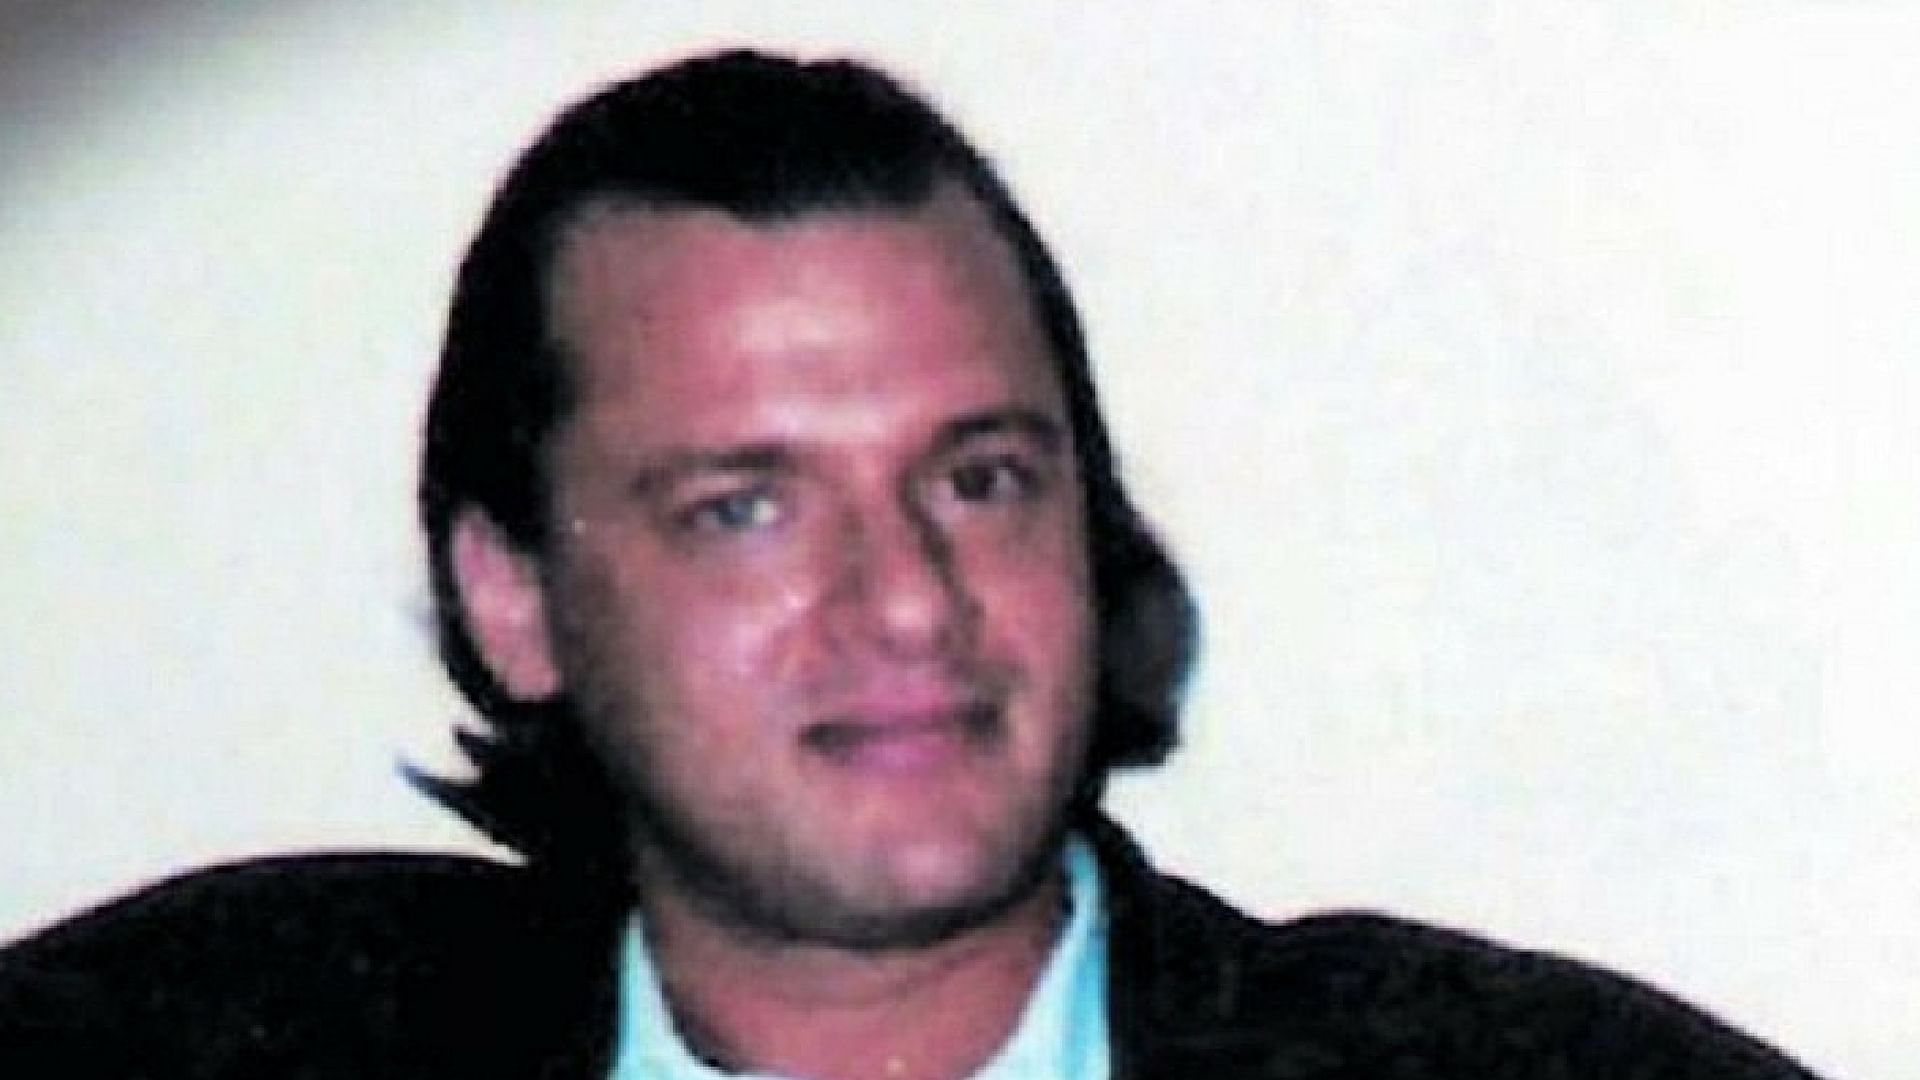 David Headley in his younger days. (Photo Courtesy: <a href="https://twitter.com/jeejeeboy/status/701748086385860609">Twitter</a>)